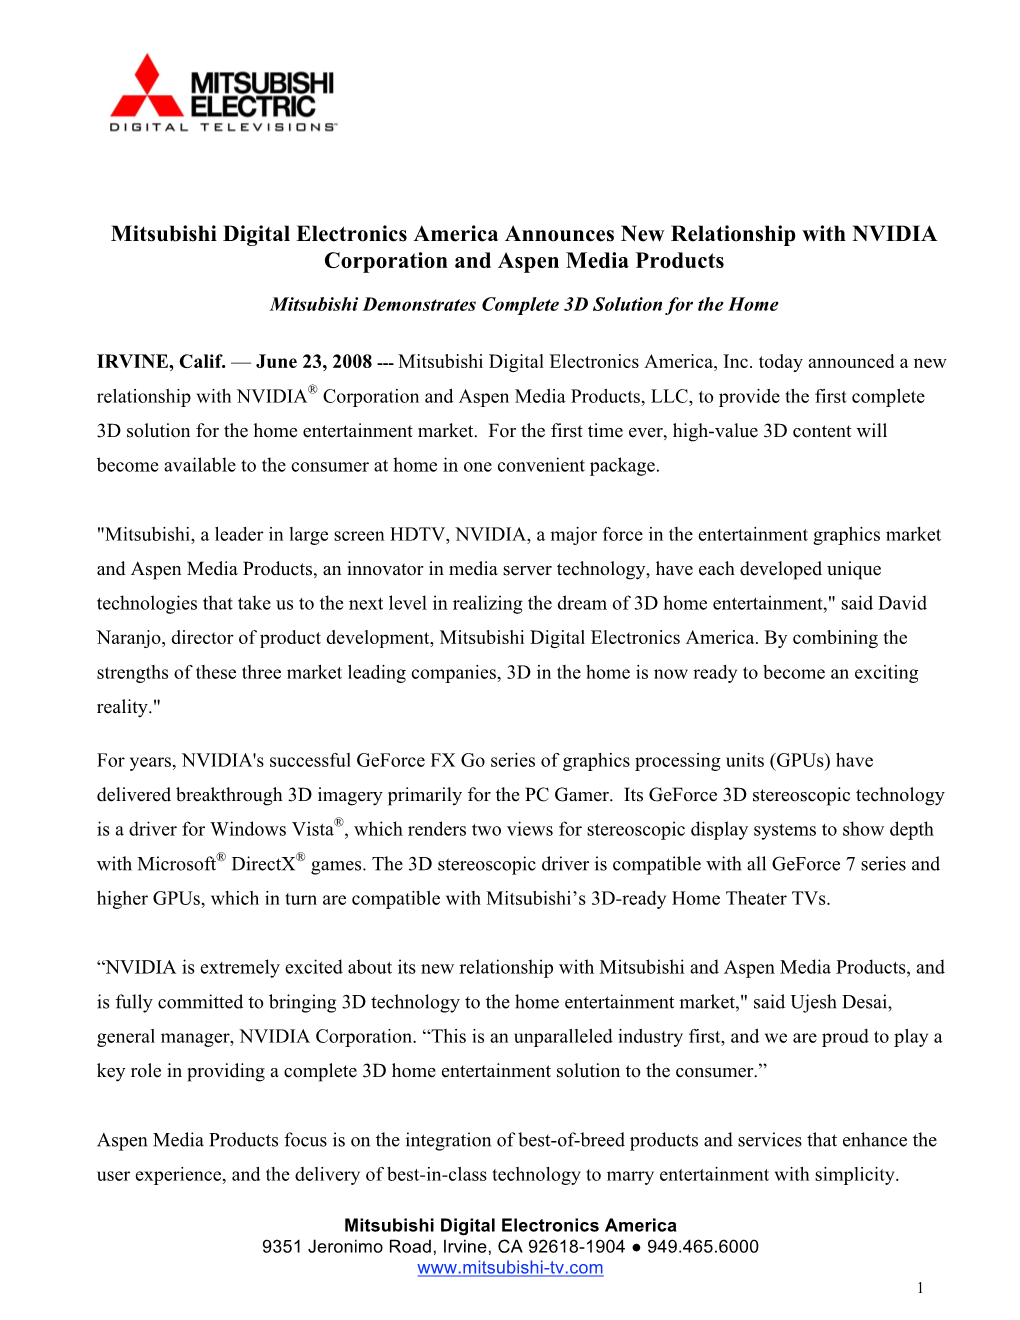 Mitsubishi Digital Electronics America Announces New Relationship with NVIDIA Corporation and Aspen Media Products